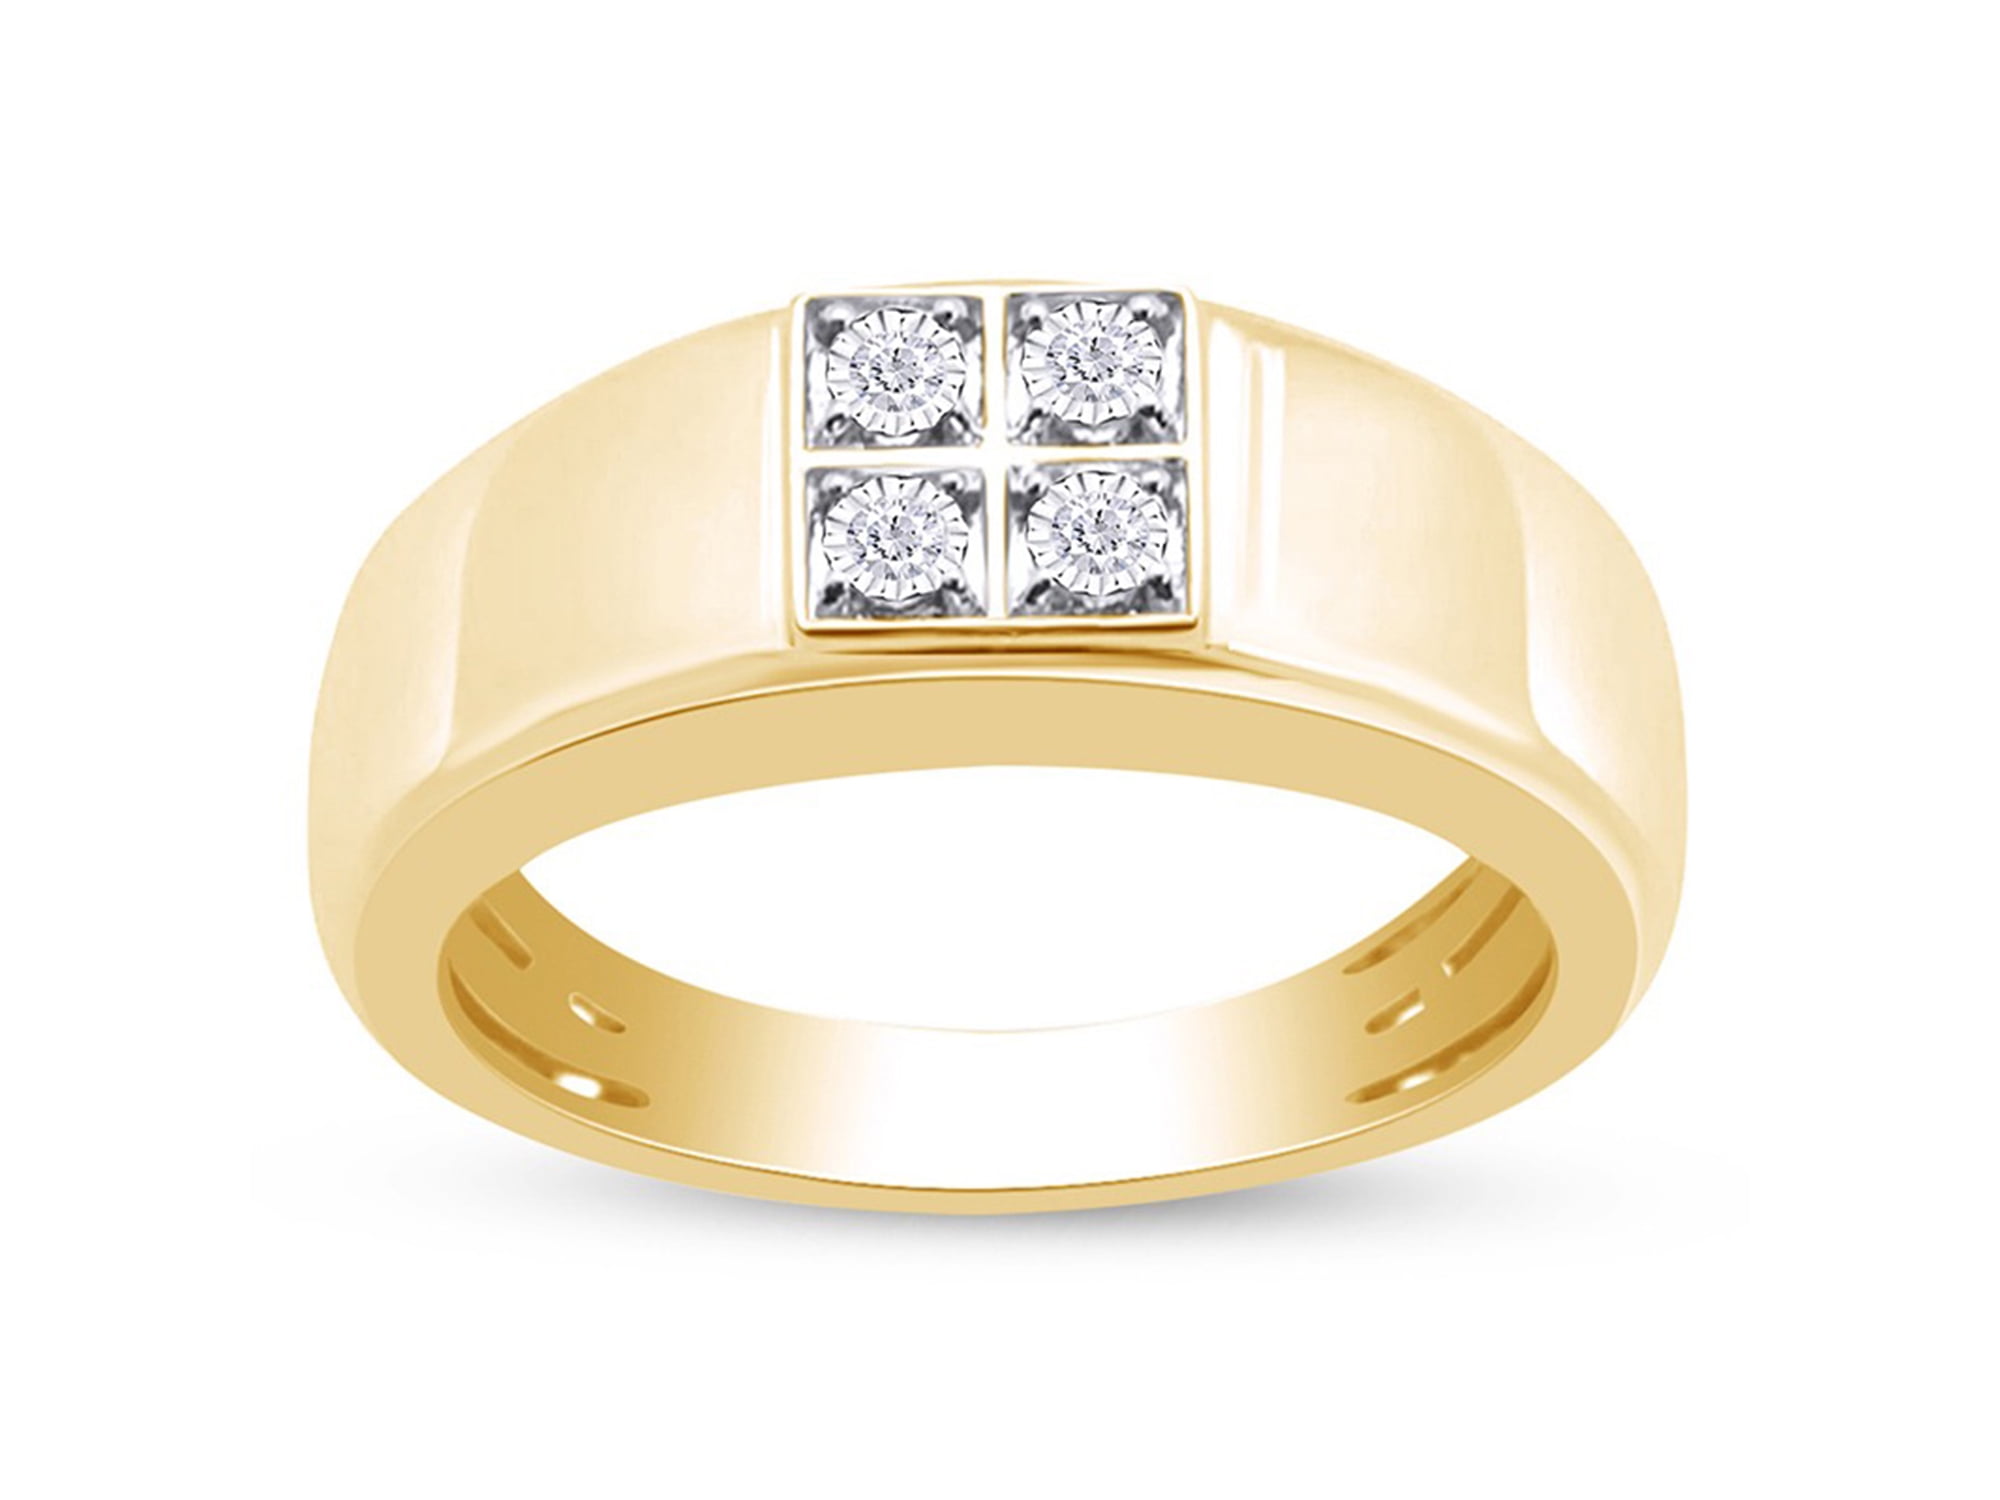 Size 6 10k Yellow Gold Diamond Anniversary Ring 1/6 cttw, I-J Color, I2-I3 Clarity 